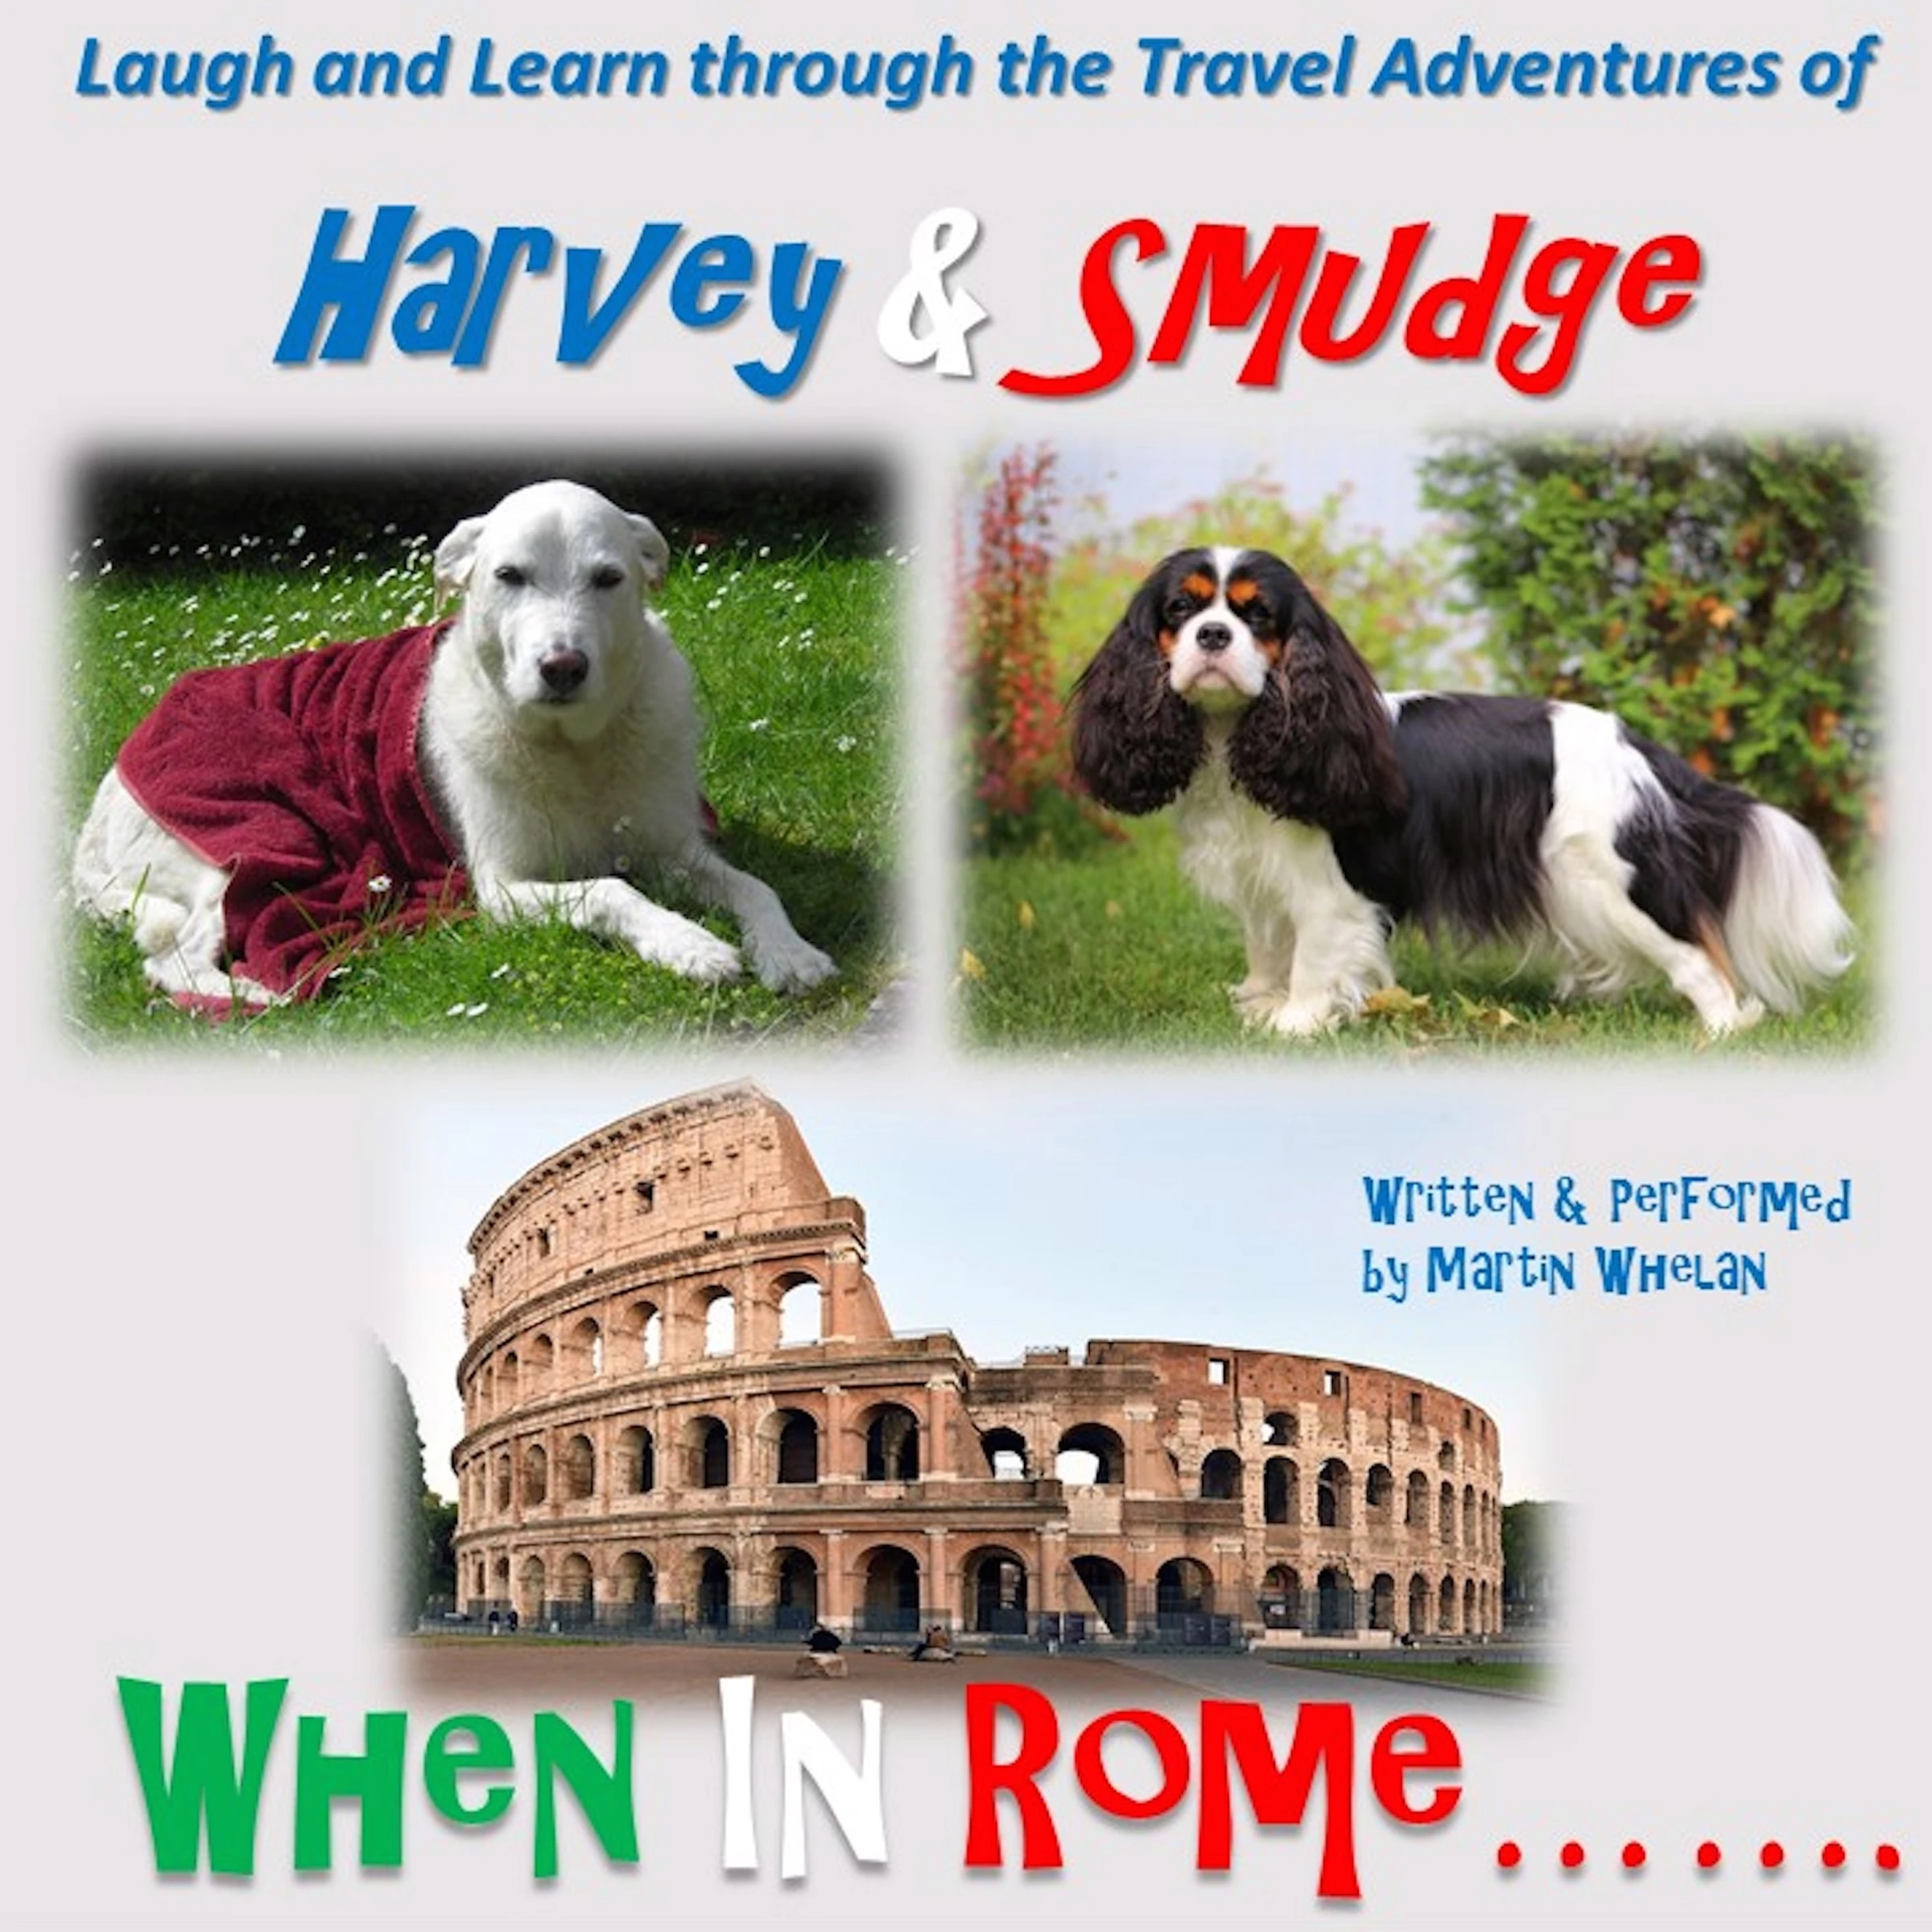 The Travel Adventures of Harvey & Smudge - When in Rome by Martin Whelan Audiobook